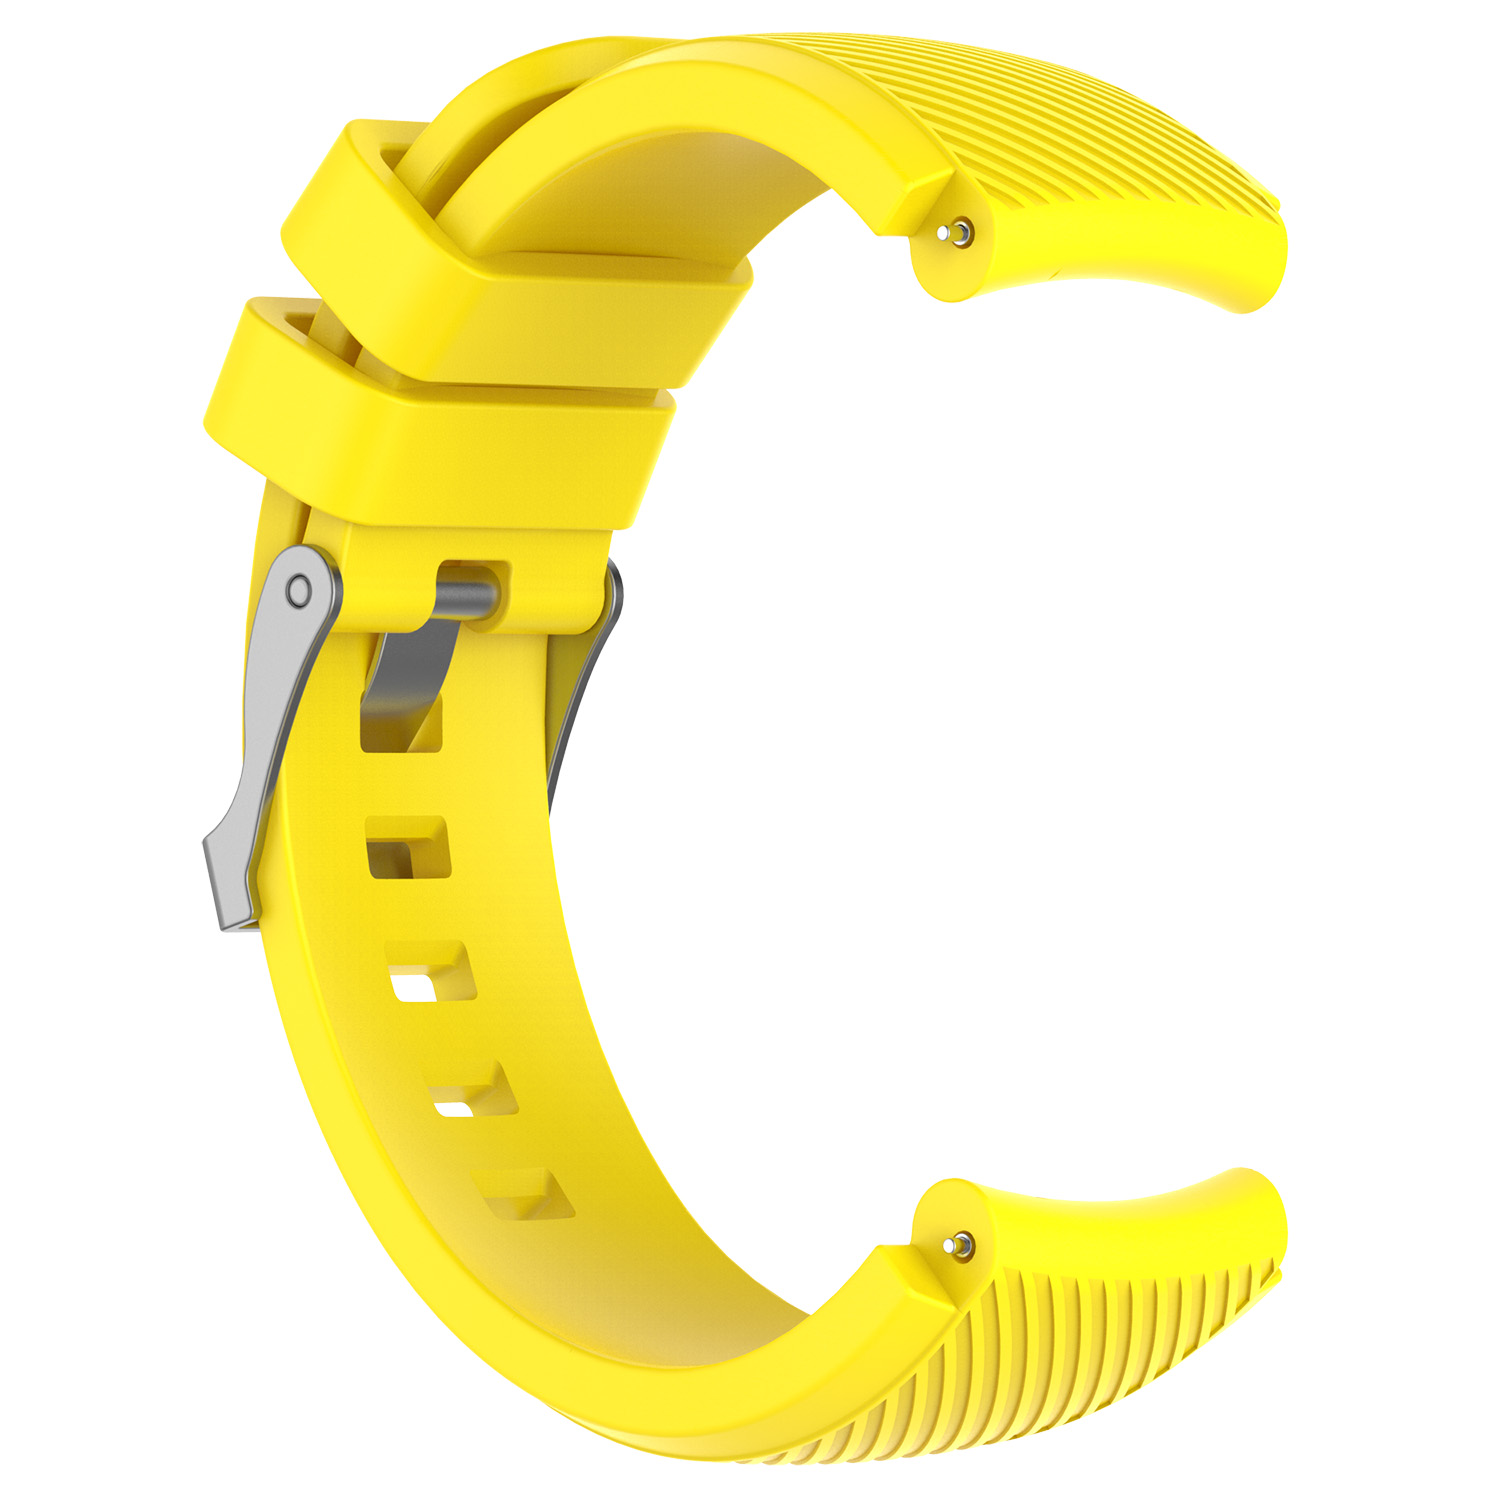 Bakeey-22mm-Universal-Watch-Band-Silicone-Watch-Strap-Replacement-for-HUAWEI-Watch-GT-1730954-10